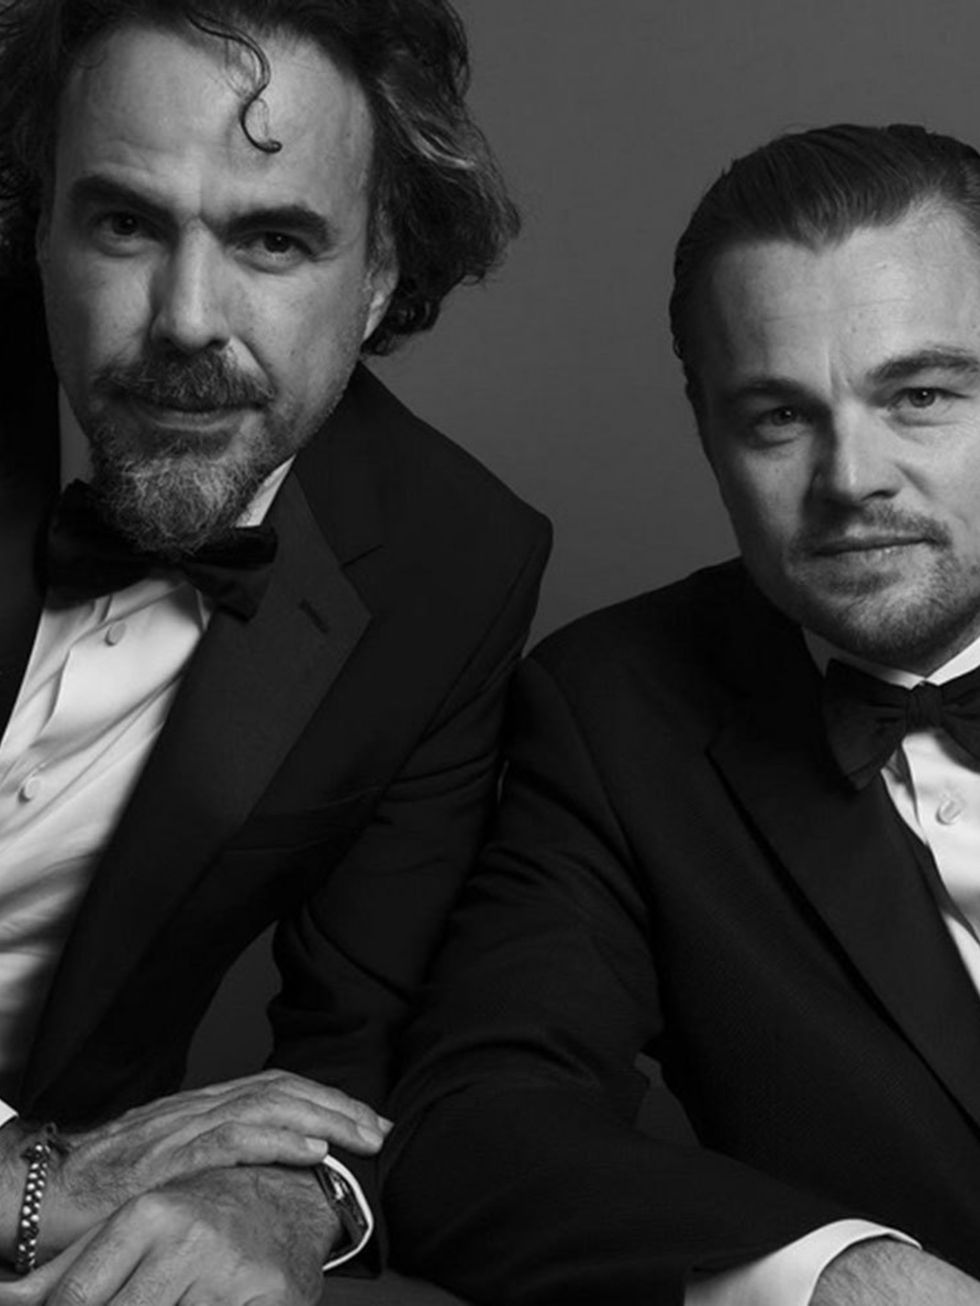 Alejandro Inarritu and Leonardo DiCaprio (@leonardodicaprio), Best Director - Motion Picture and Best Performance By An Actor In A Motion Picture - Drama, for "The Revenant". Photo by @inezandvinoodh #goldenglobes